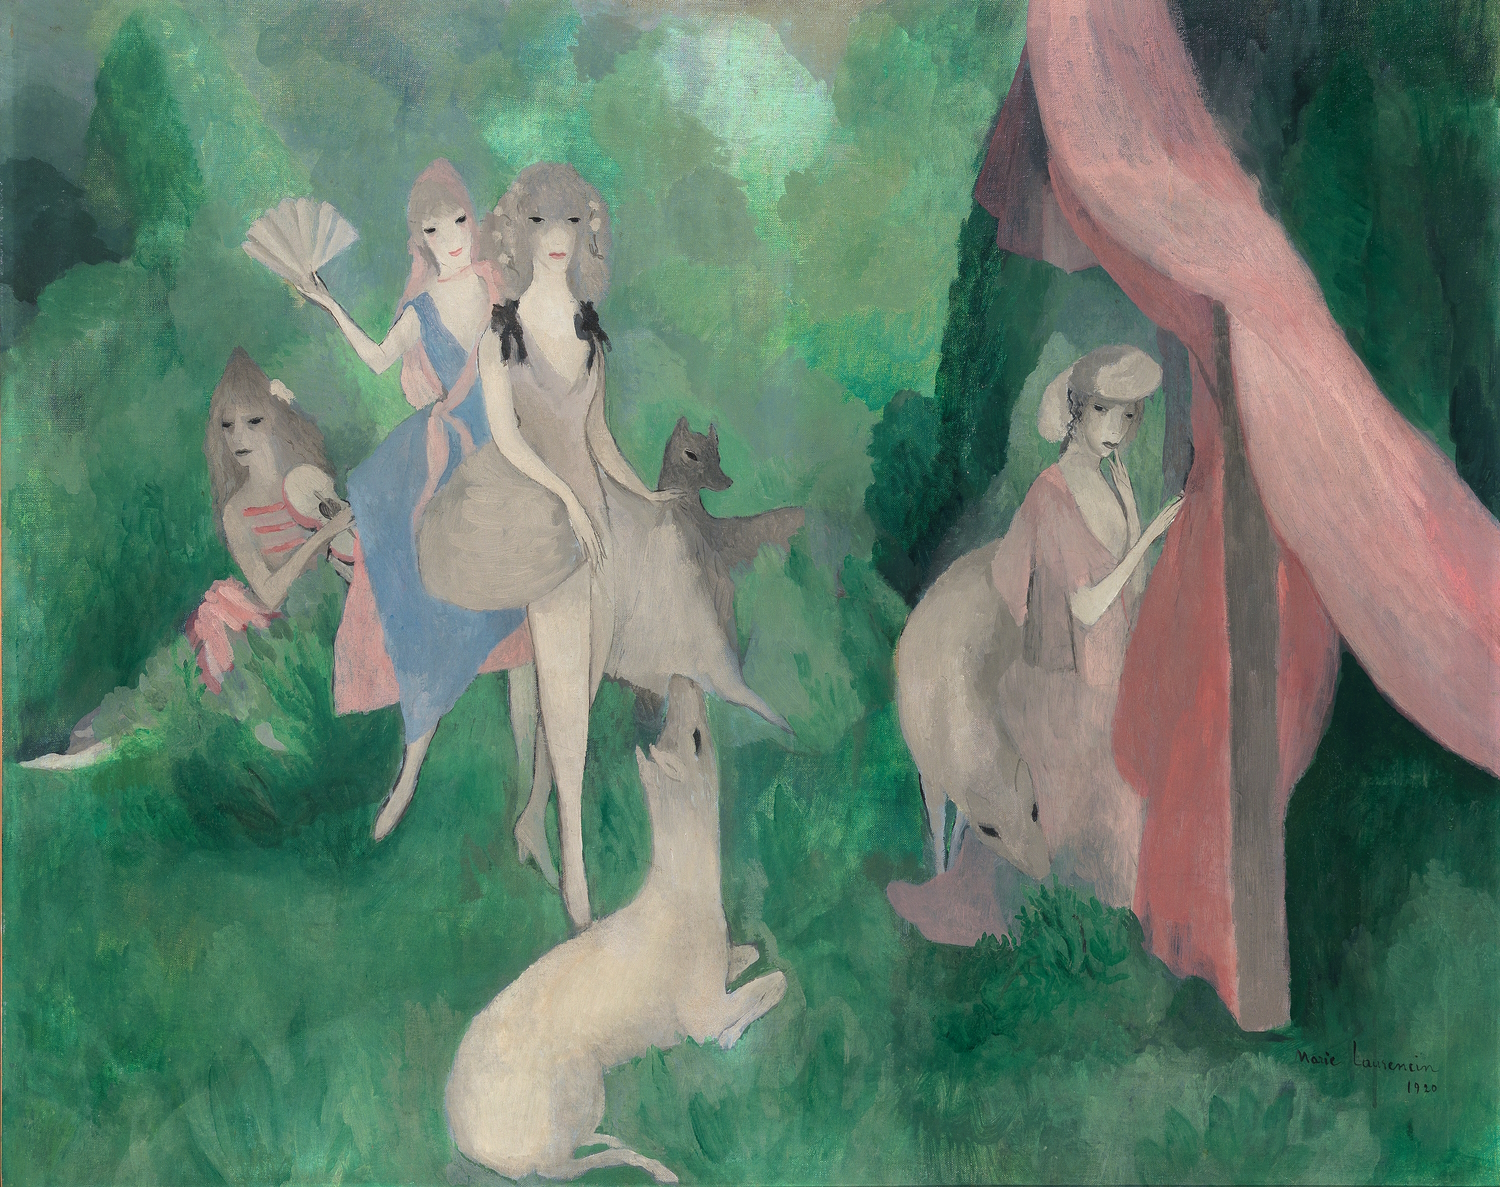 Marie Laurencin, Women in the Forest (Femmes dans la forêt), 1920. Oil on canvas. Private collection, Alberta, Canada. © Fondation Foujita / Artists Rights Society (ARS), New York / ADAGP, Paris 2023